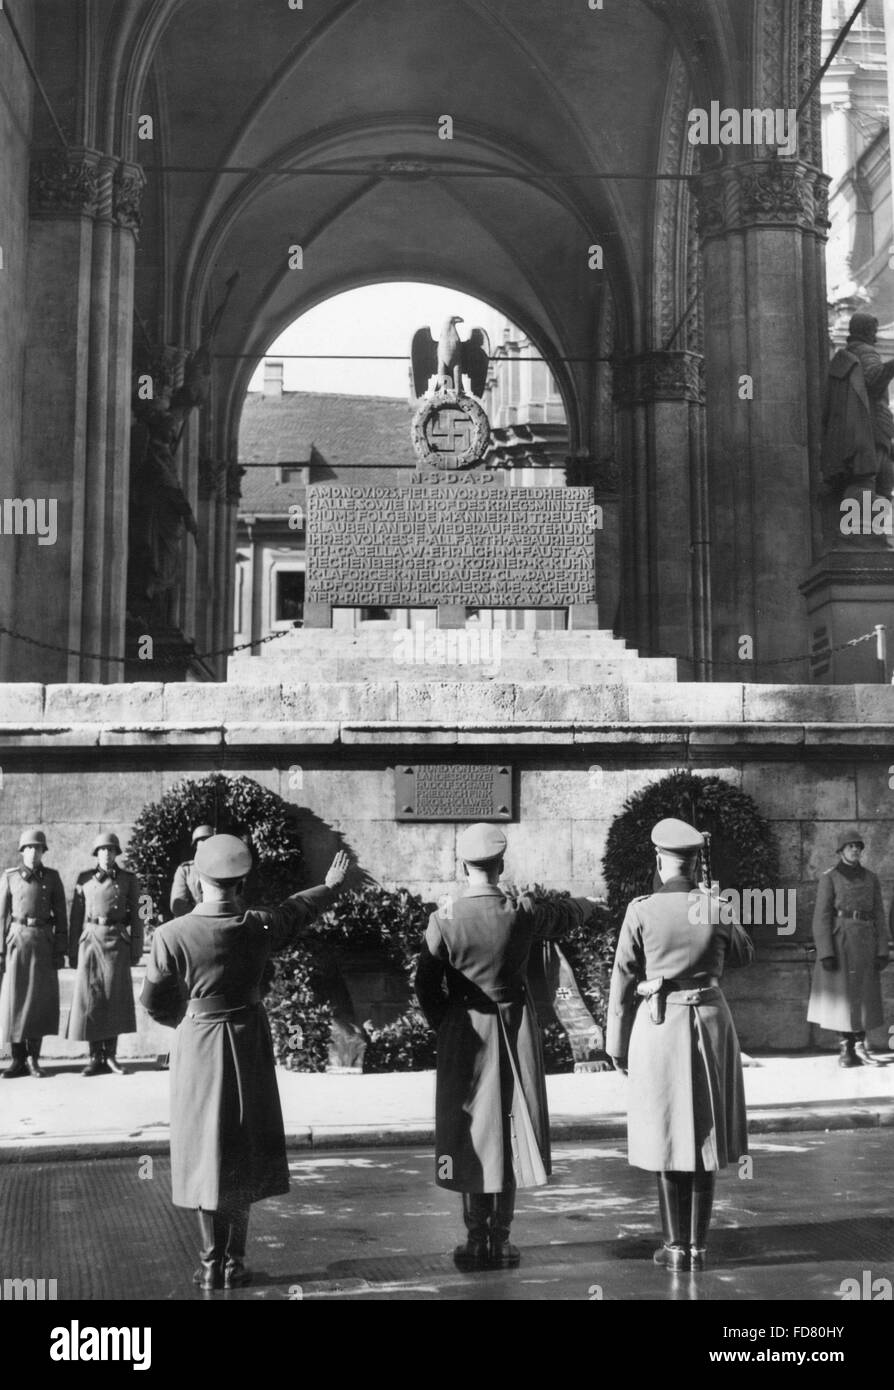 Commemoration event on the Beer Hall Putsch, 09.11.1940 Stock Photo